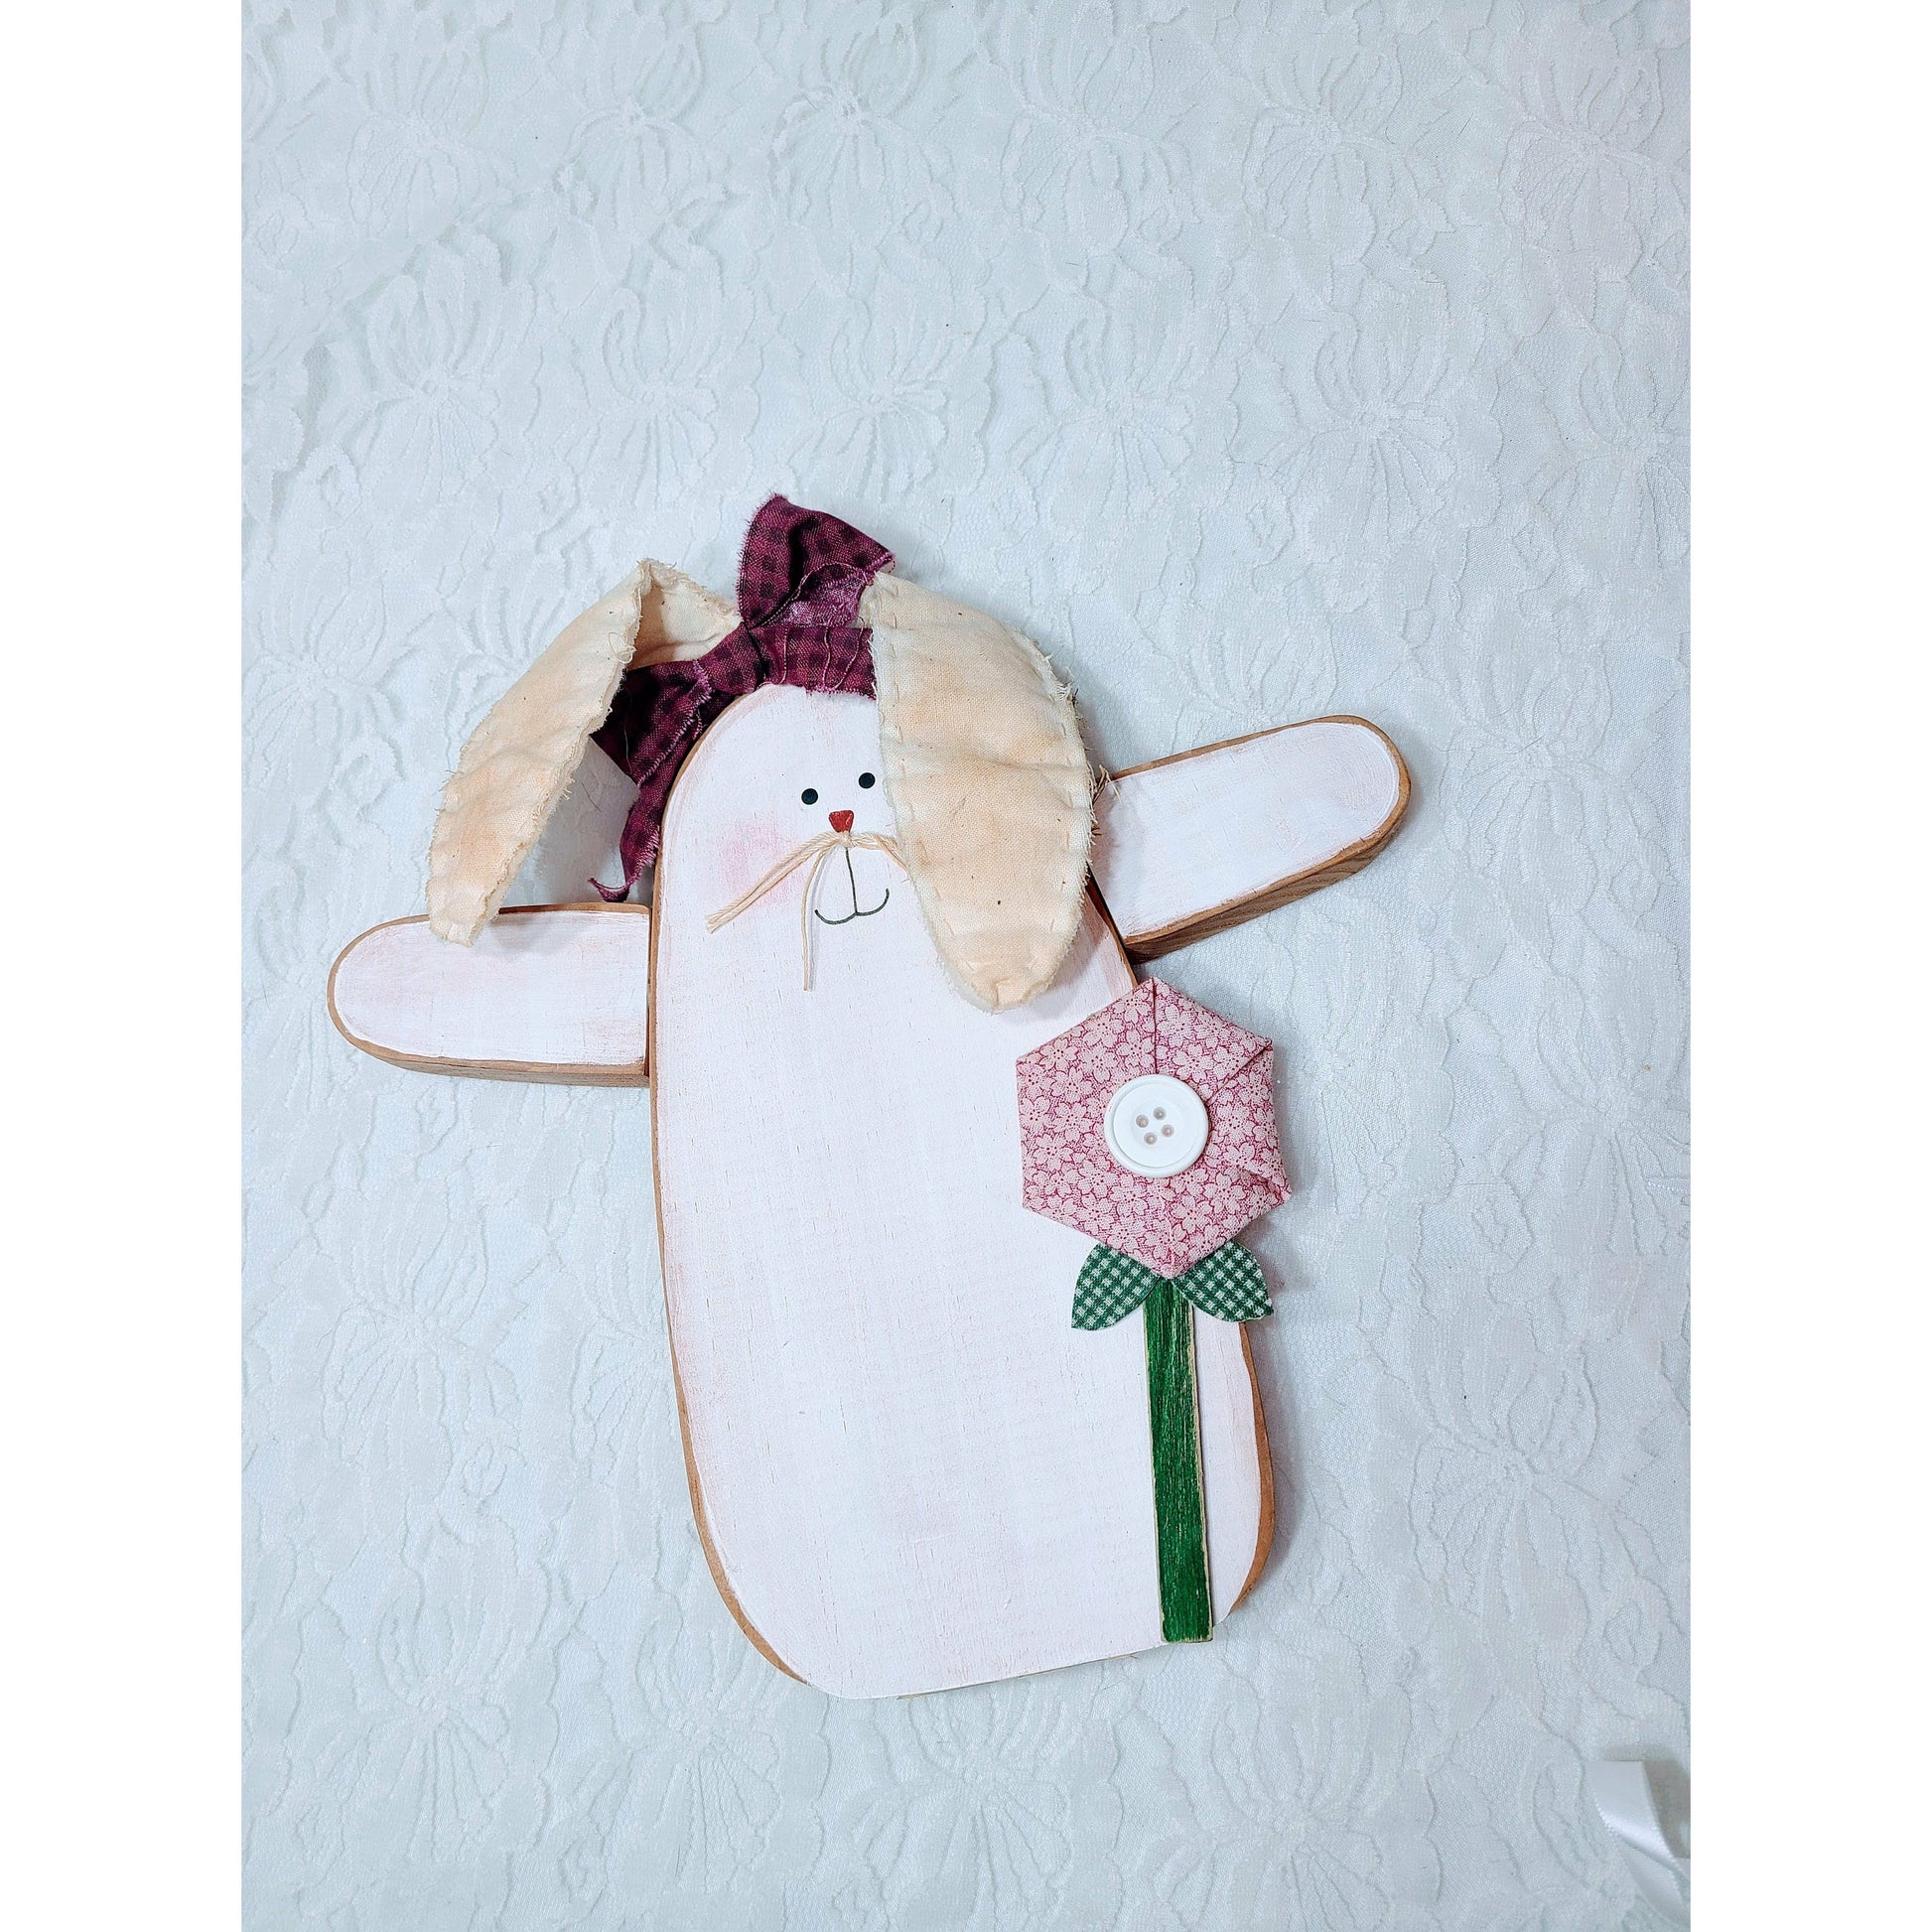 Easter Decorations Wooden Tole Painted 10" Handmade Primitive Shabby Bunny with Fabric Ears ~ Hanging Wood Ornament ~ OOAK Art